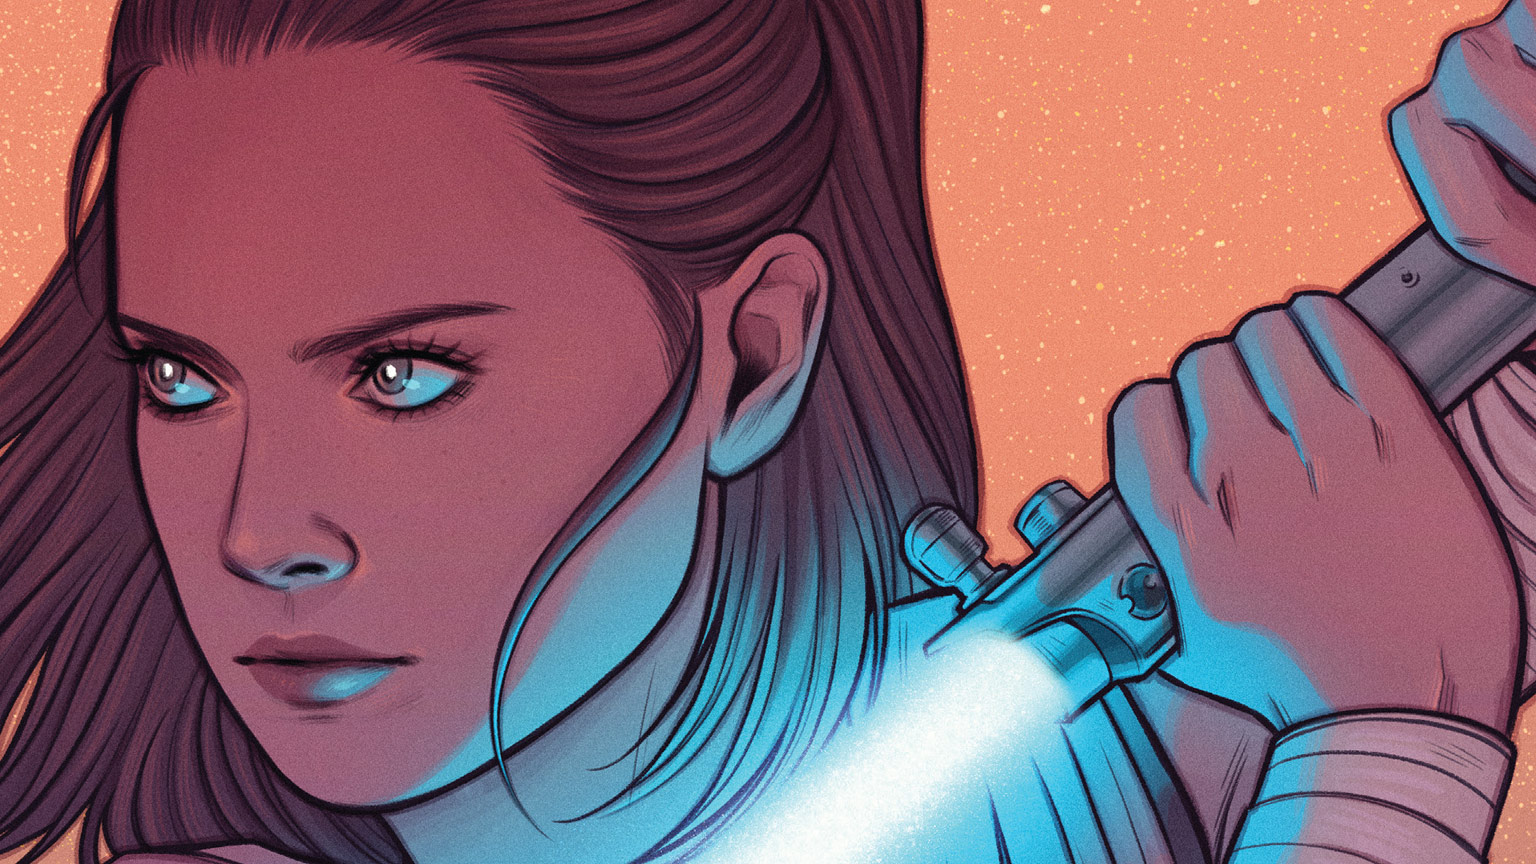 The cover art for Women of the Galaxy by Amy Ratcliffe was created by Jen Bartel and depicts Rey ready for action